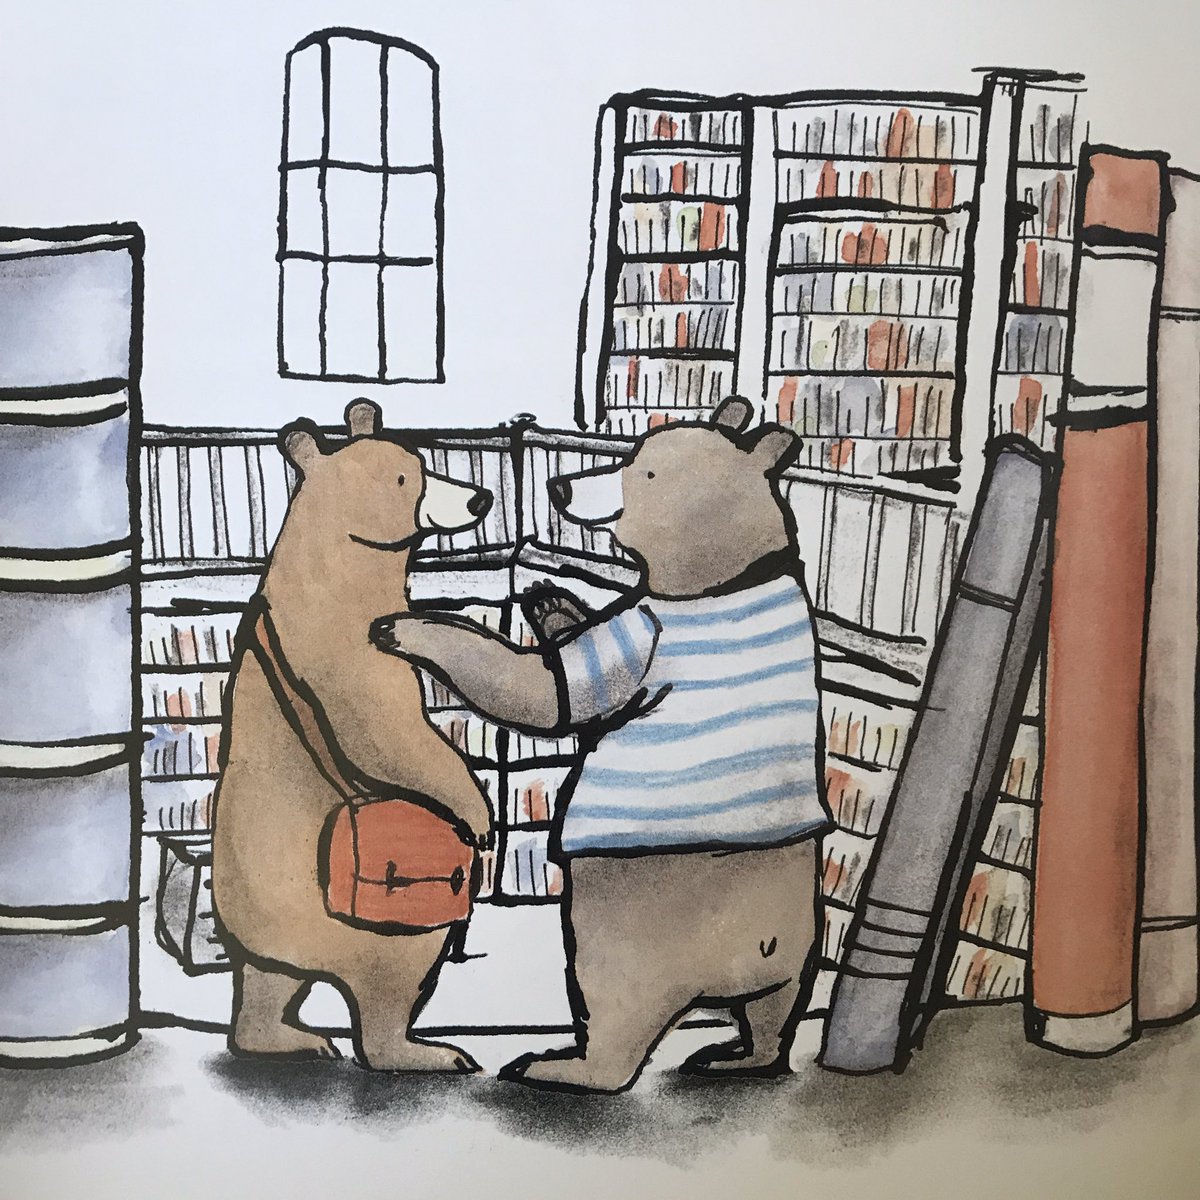 Coffee break is over! Next: where might books go after they are made? One option is a library (obviously). Libraries range from the grand...  #booksinchildrensbooks